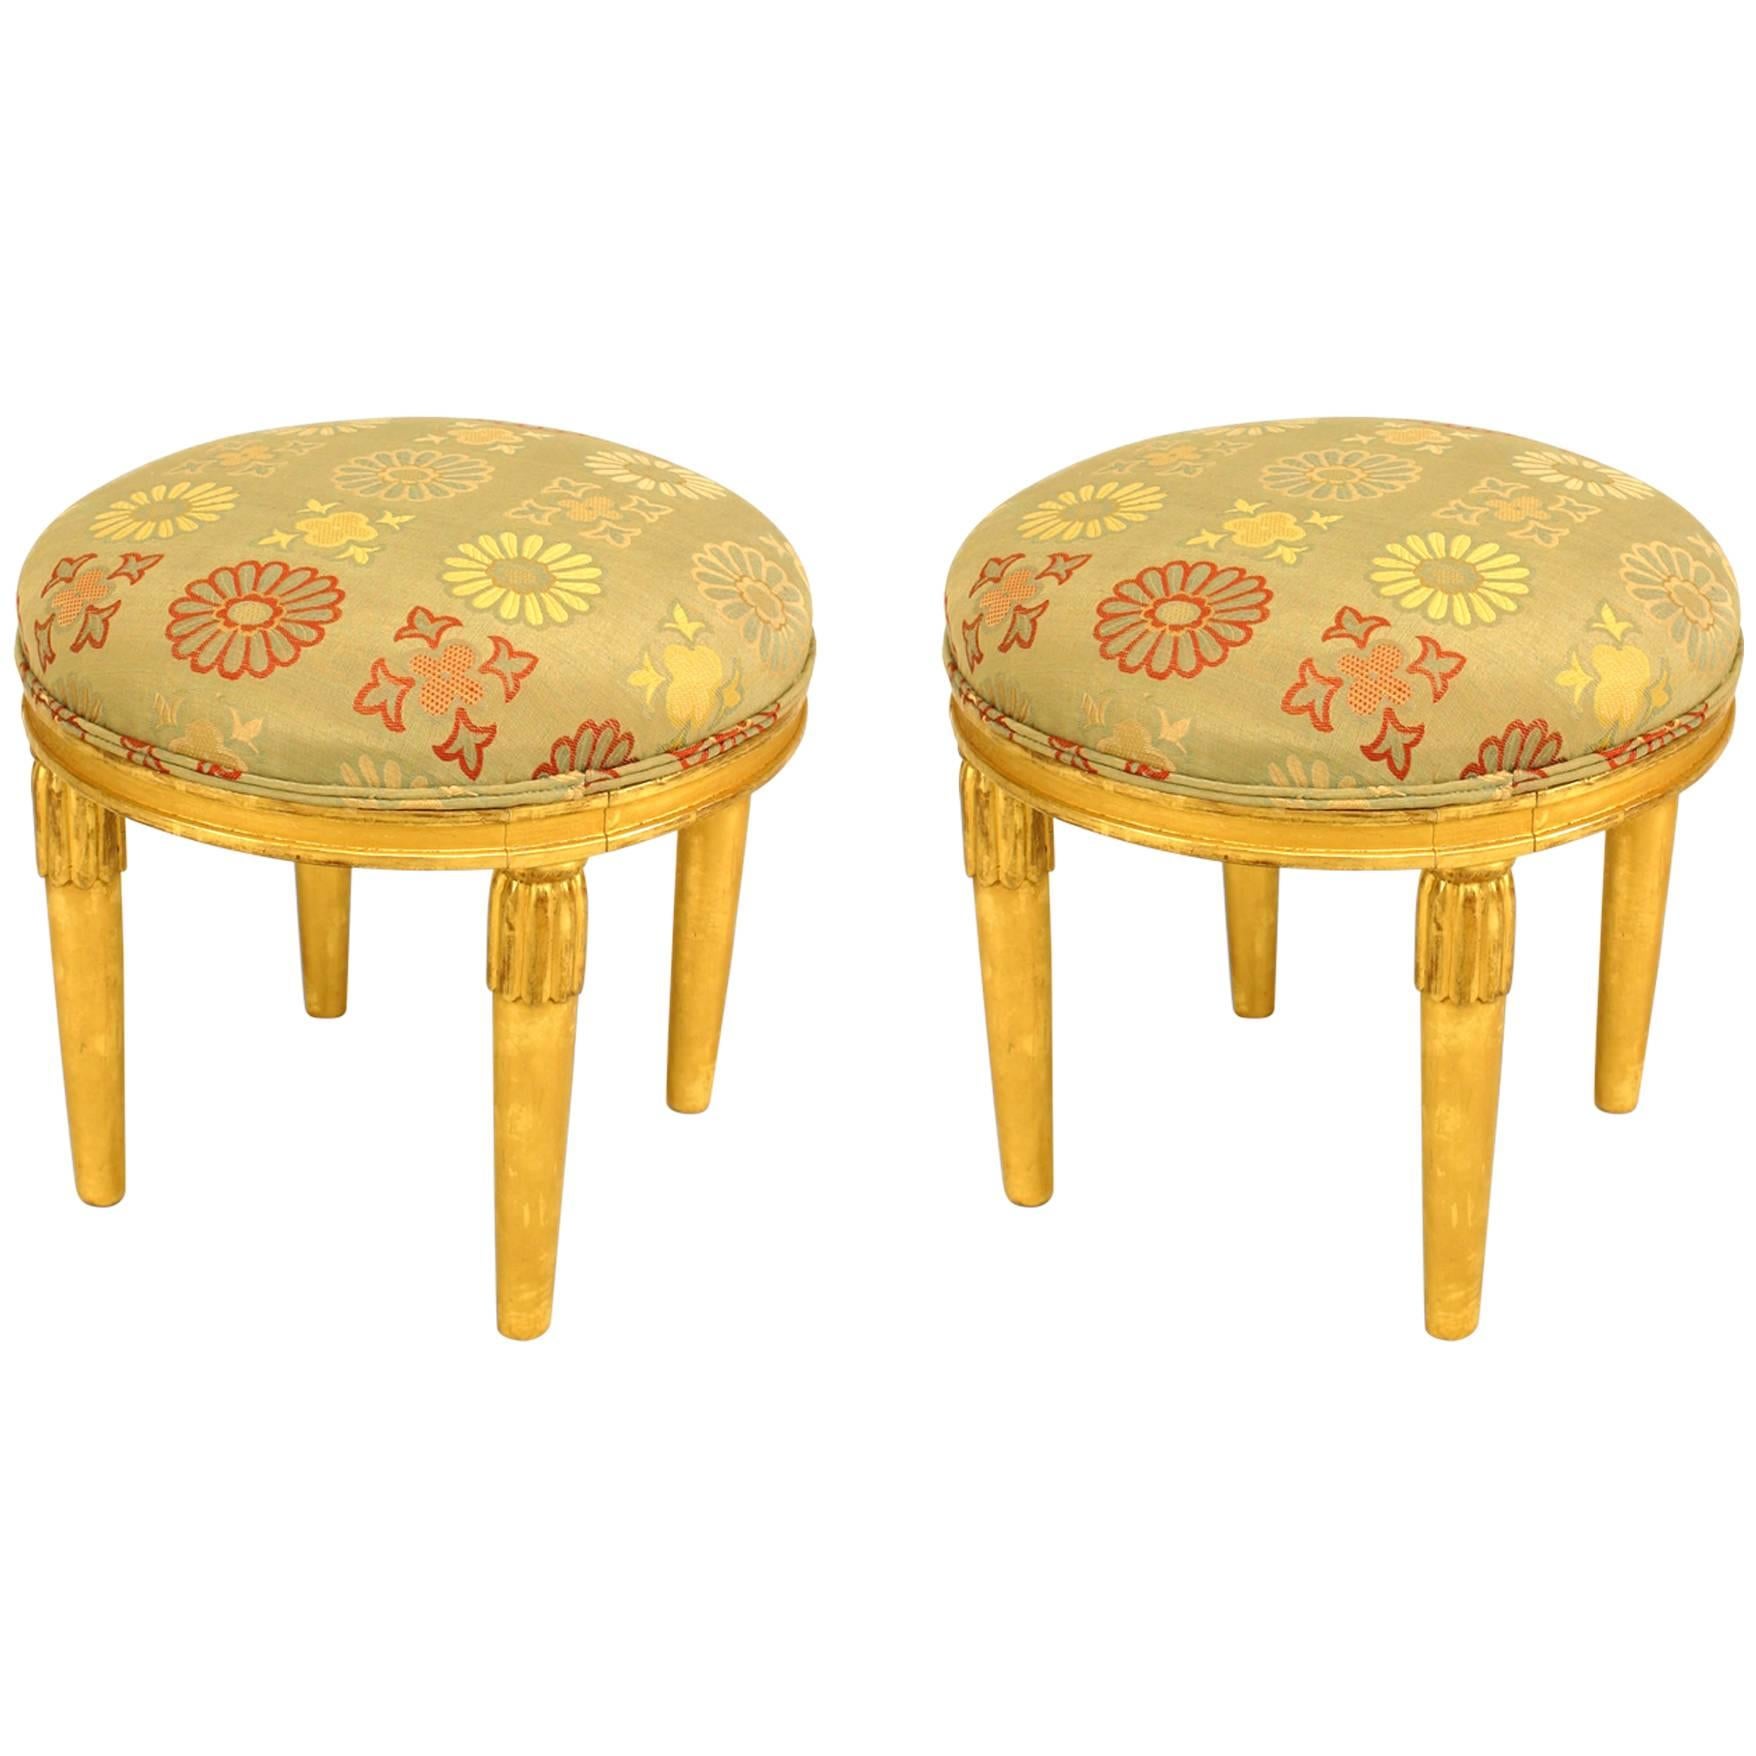 Pair of French Art Deco Gilt Round Low Stools For Sale